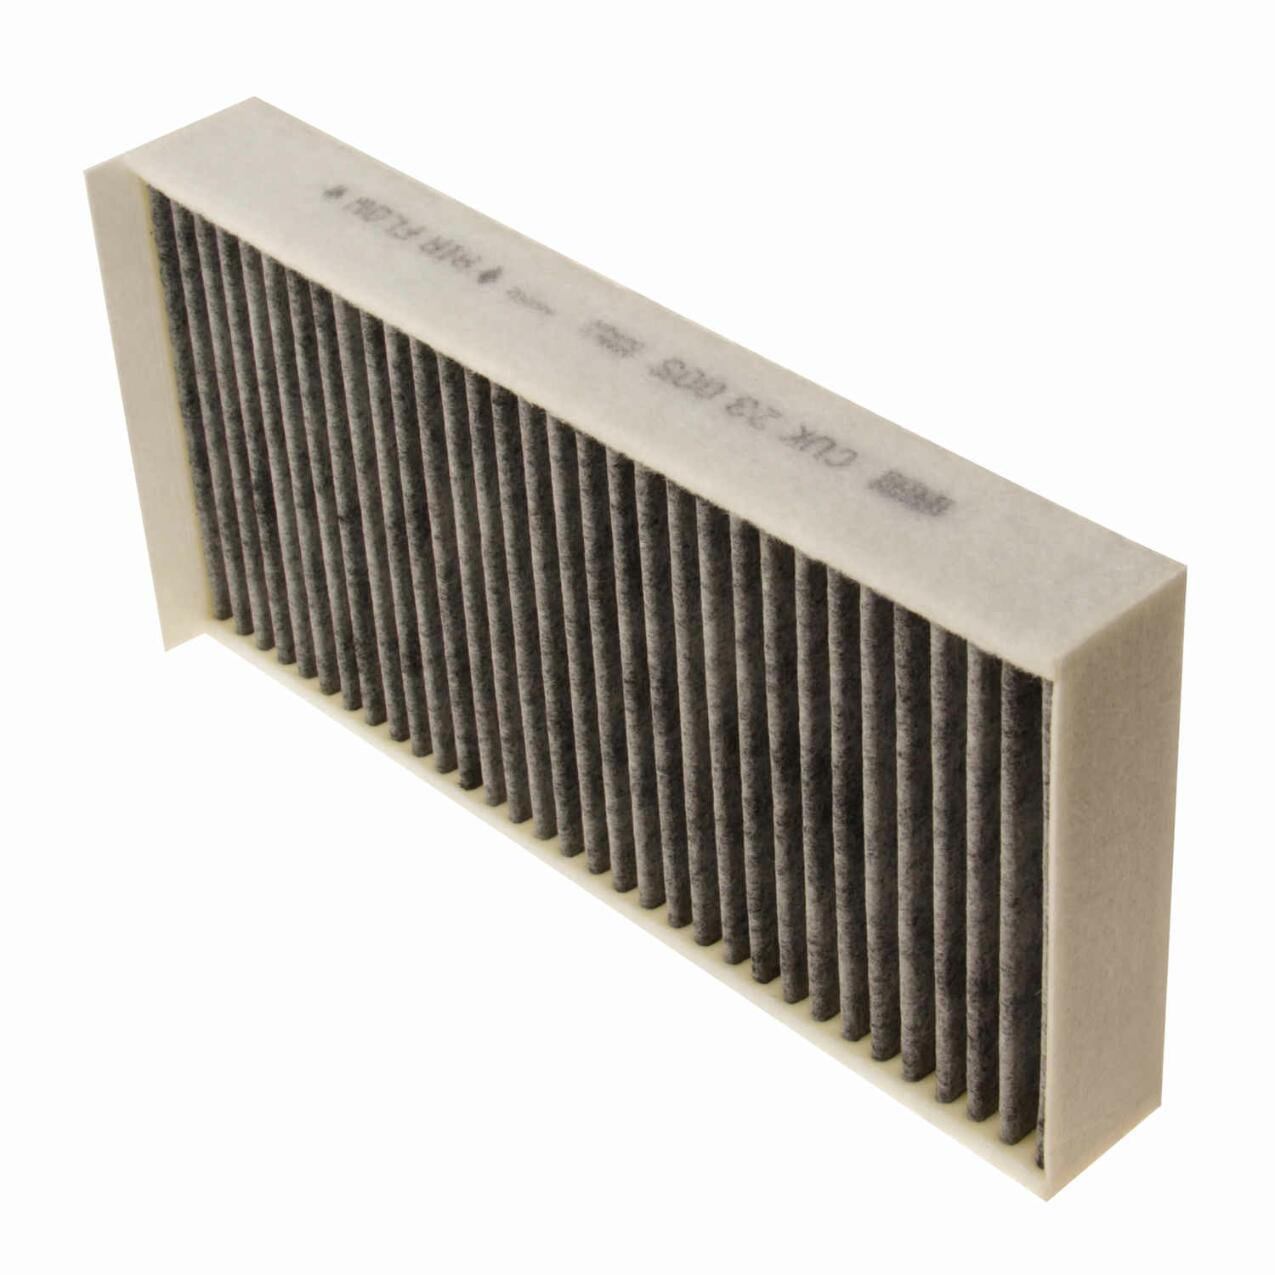 BMW Cabin Air Filter (Activated Charcoal) 64116823725 - MANN-FILTER CUK230052